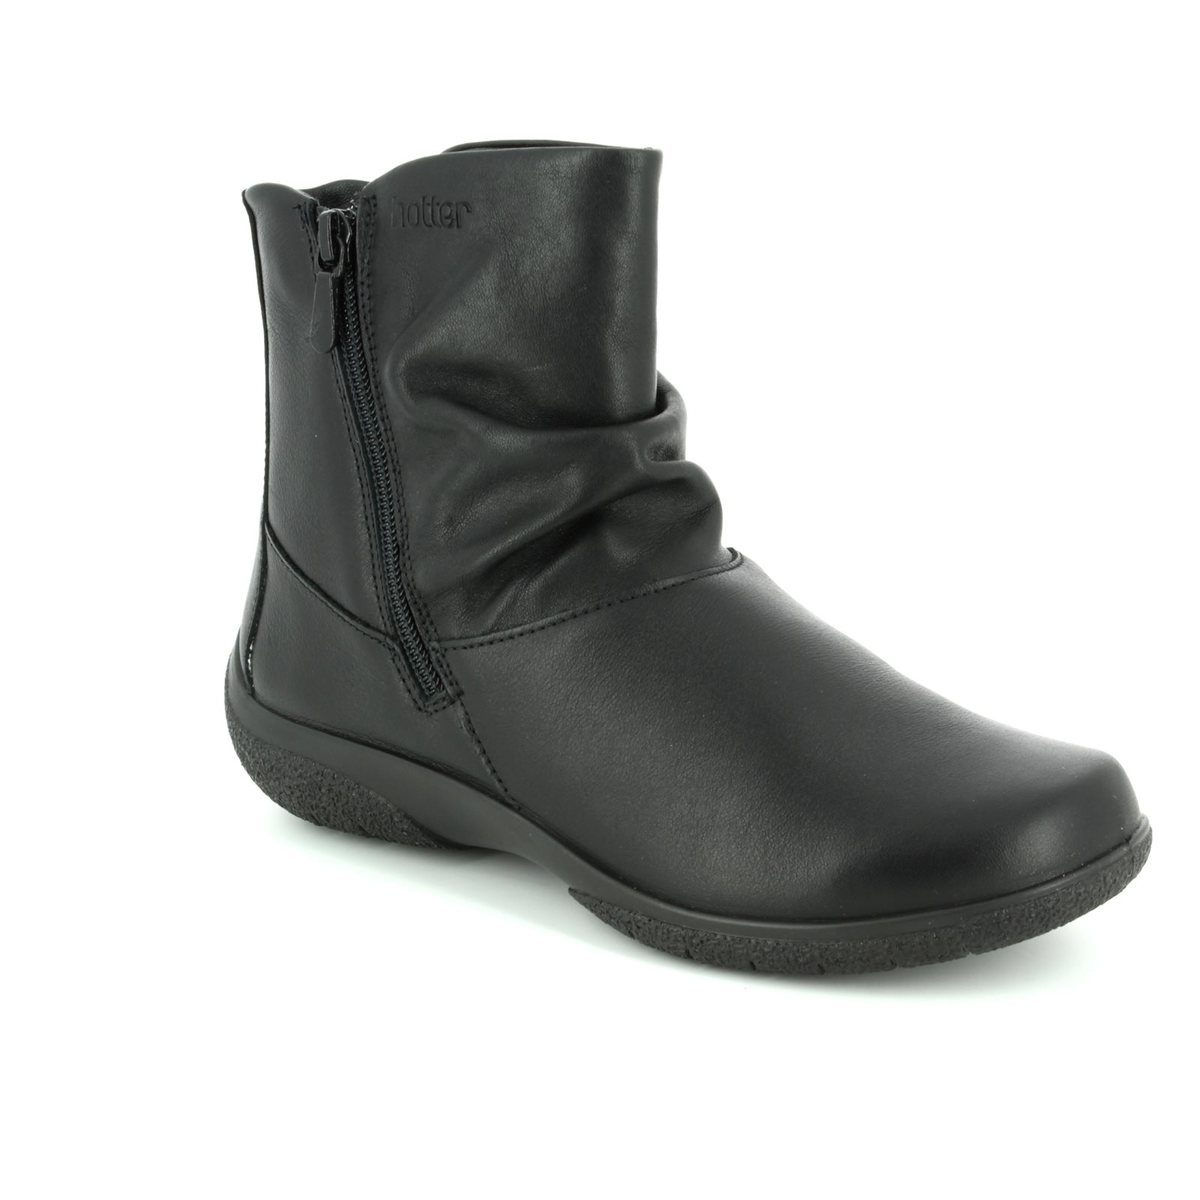 hotter black ankle boots order 22f44 1d17e